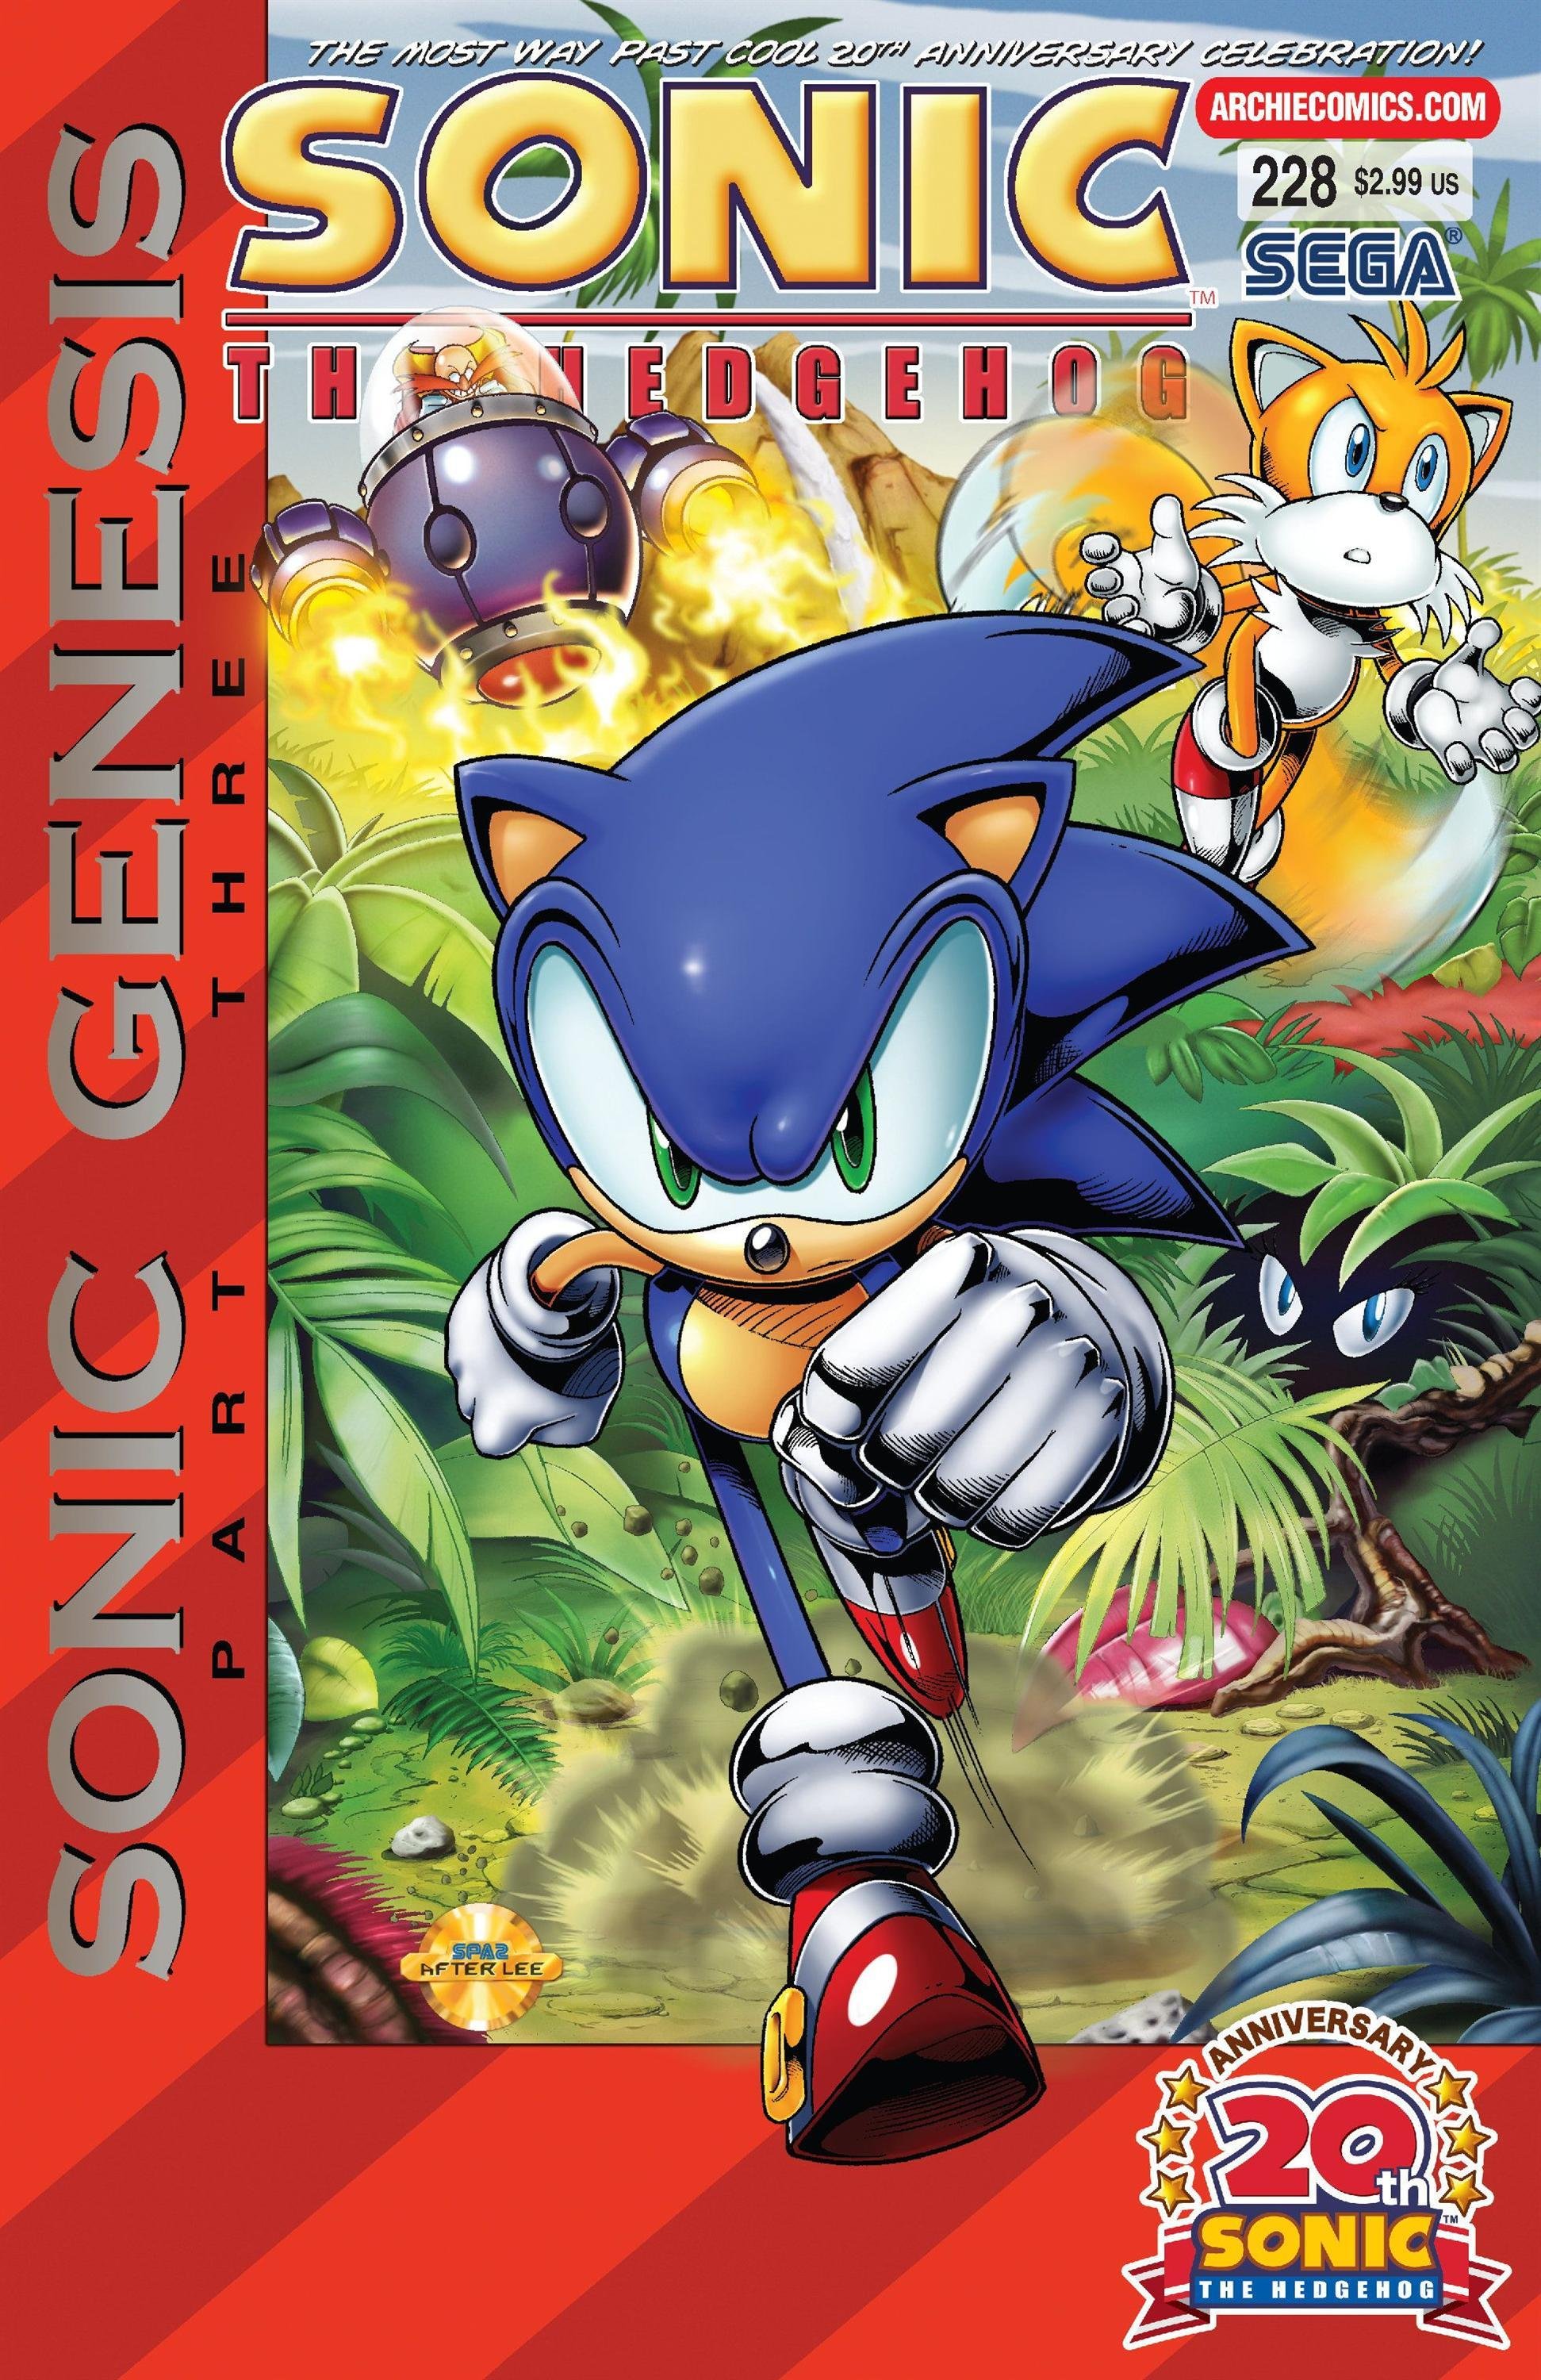 Sonic the Hedgehog 228 (October 2011) Sonic the Hedgehog Retromags